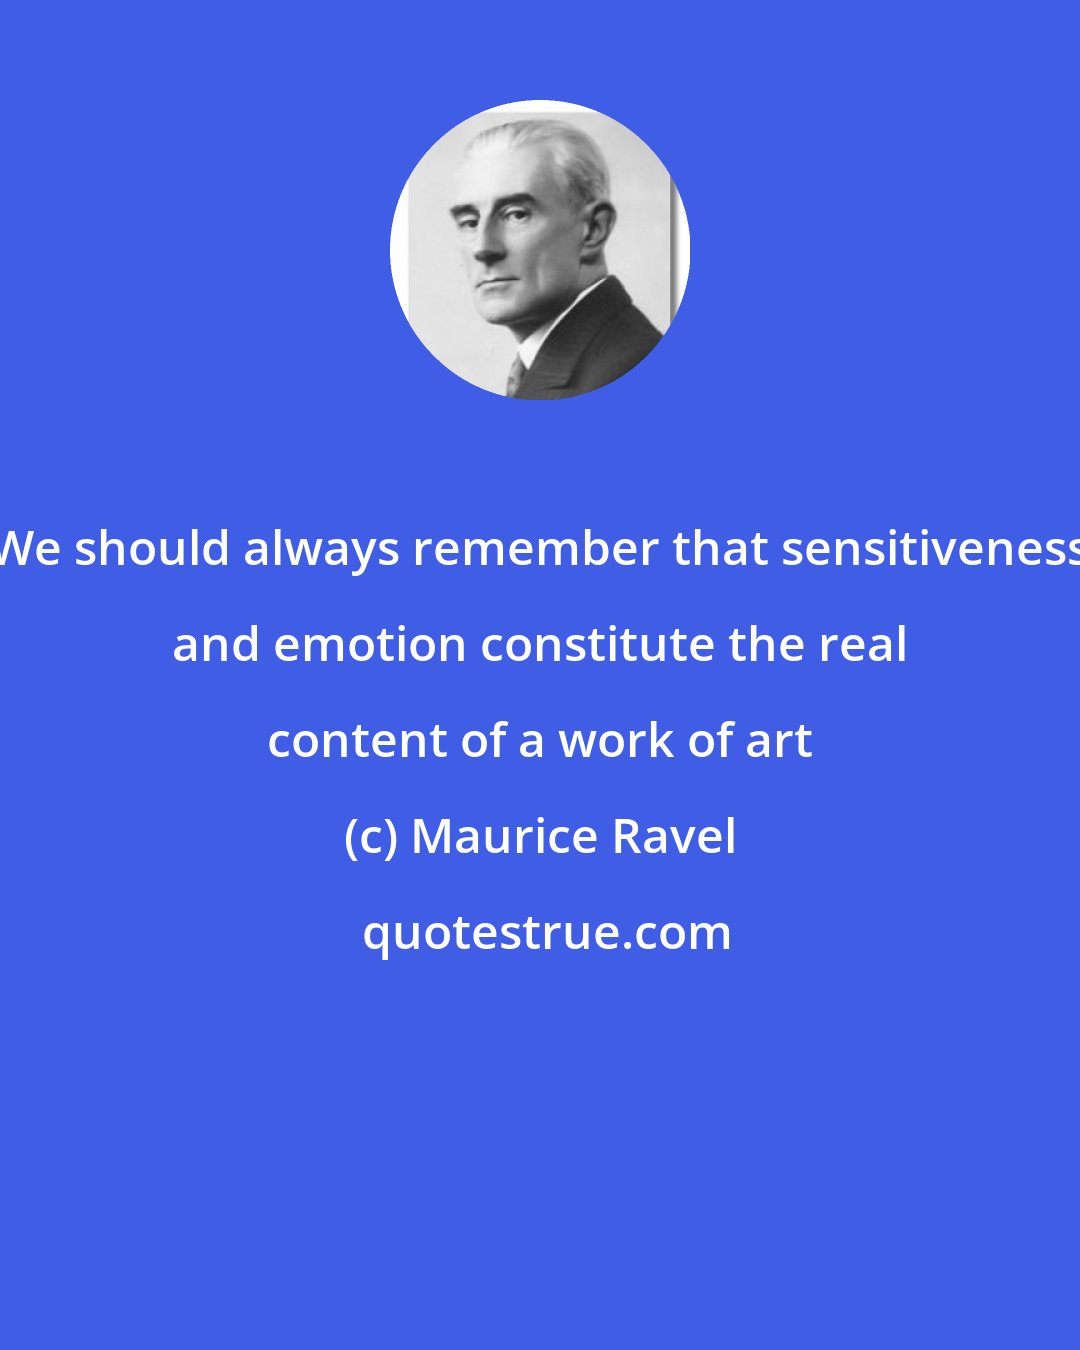 Maurice Ravel: We should always remember that sensitiveness and emotion constitute the real content of a work of art